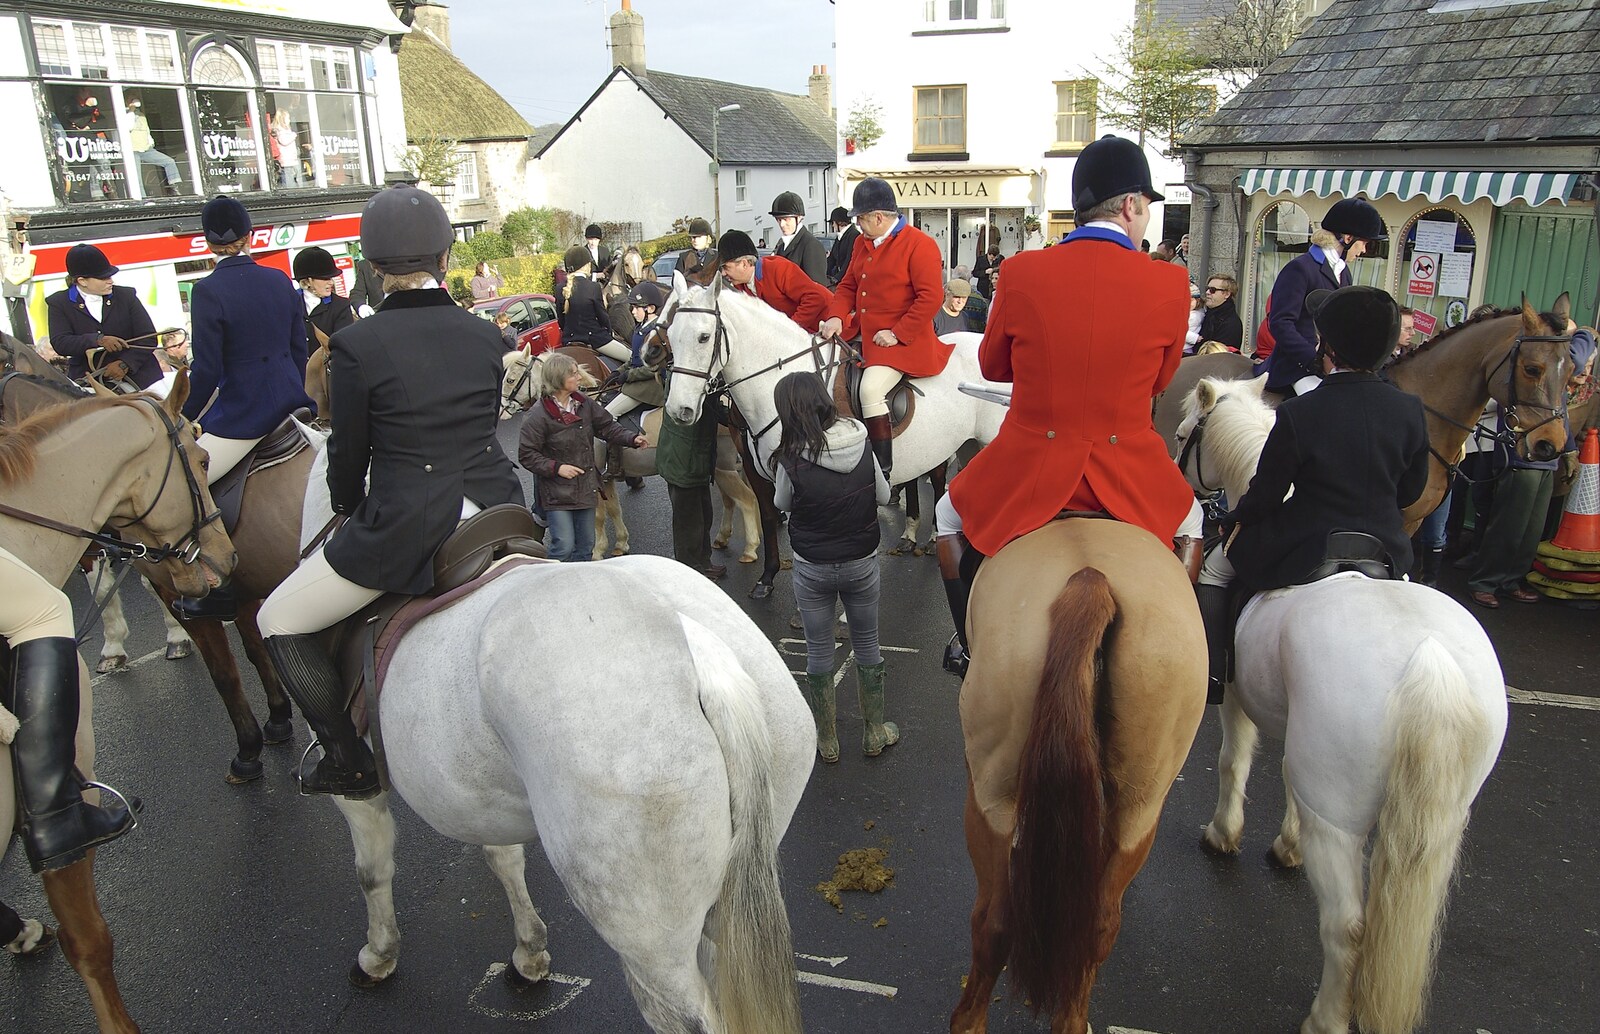 Horses' arses from A Boxing Day Hunt, Chagford, Devon - 26th December 2007